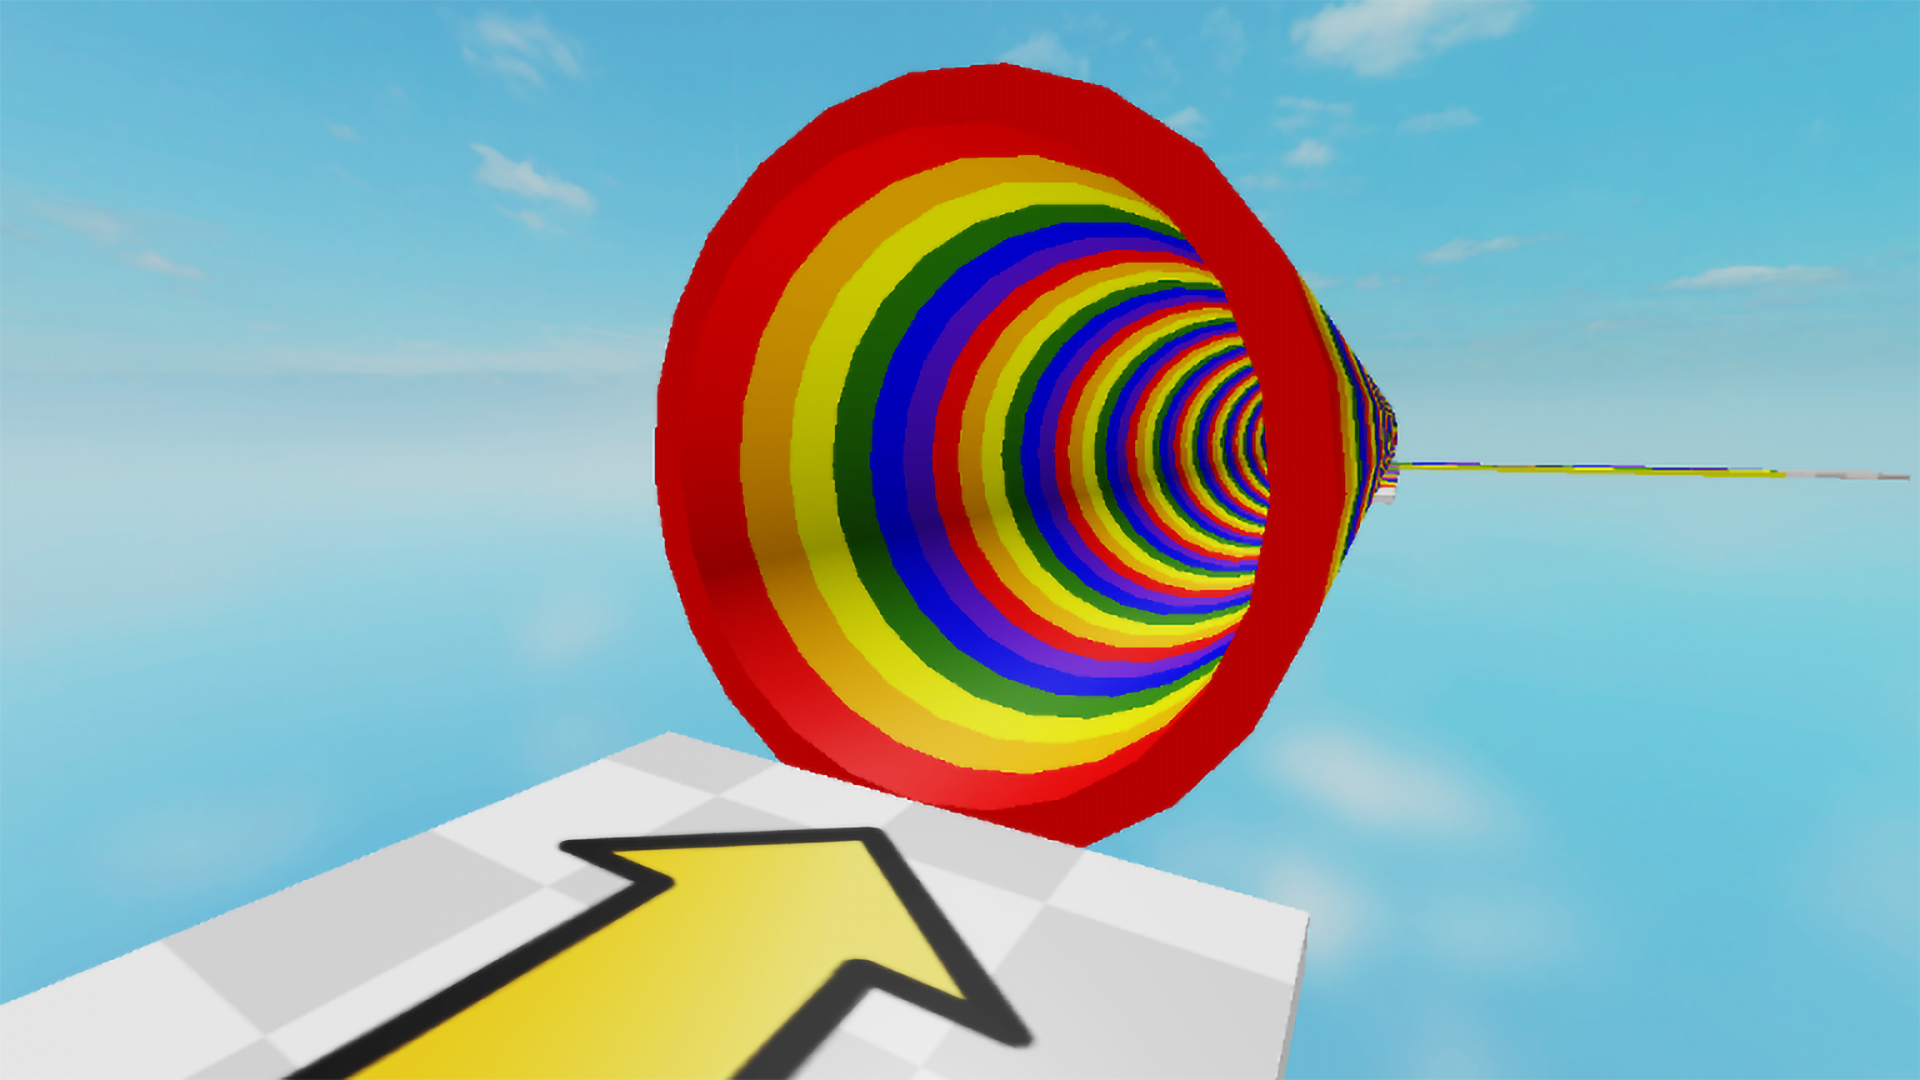 Best Obby Games In Roblox